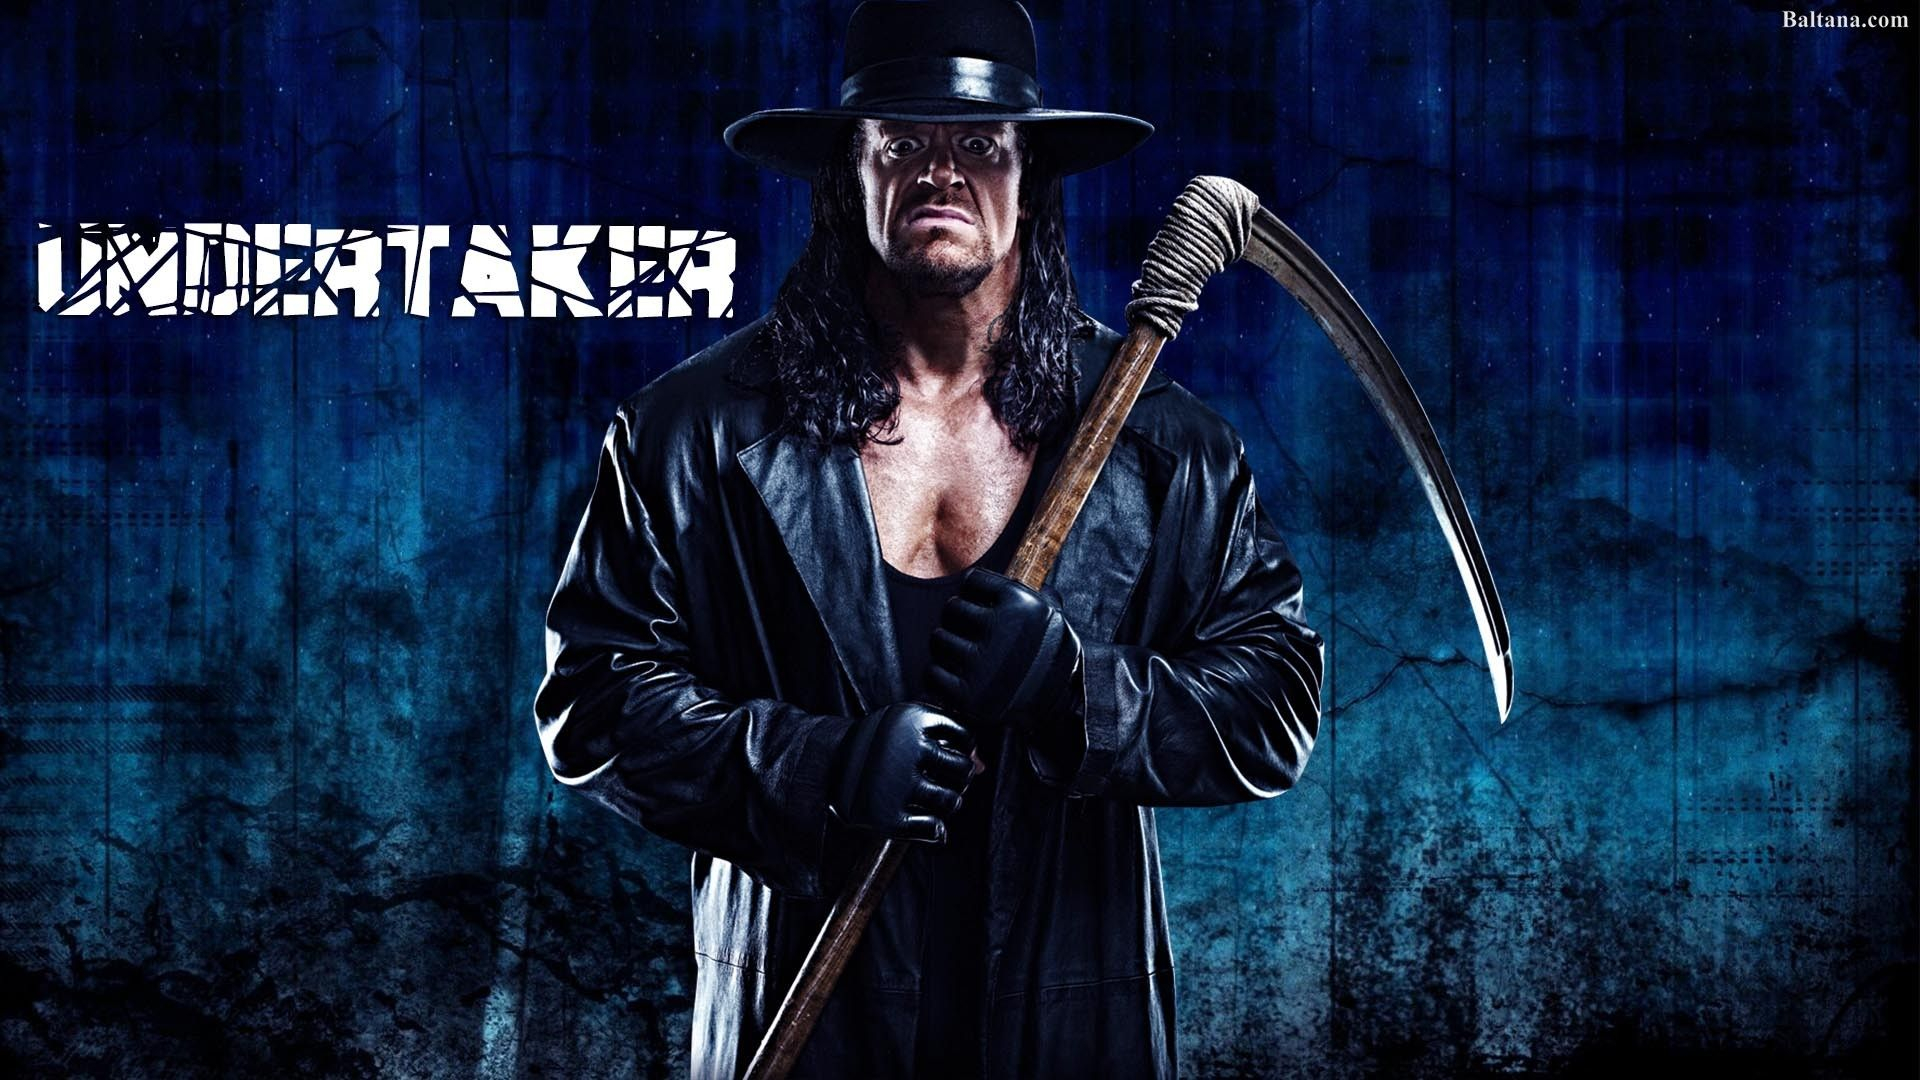 1920x1080 The Undertaker Wallpaper: Top Free The Undertaker Backgrounds, Pictures \u0026 Images Download